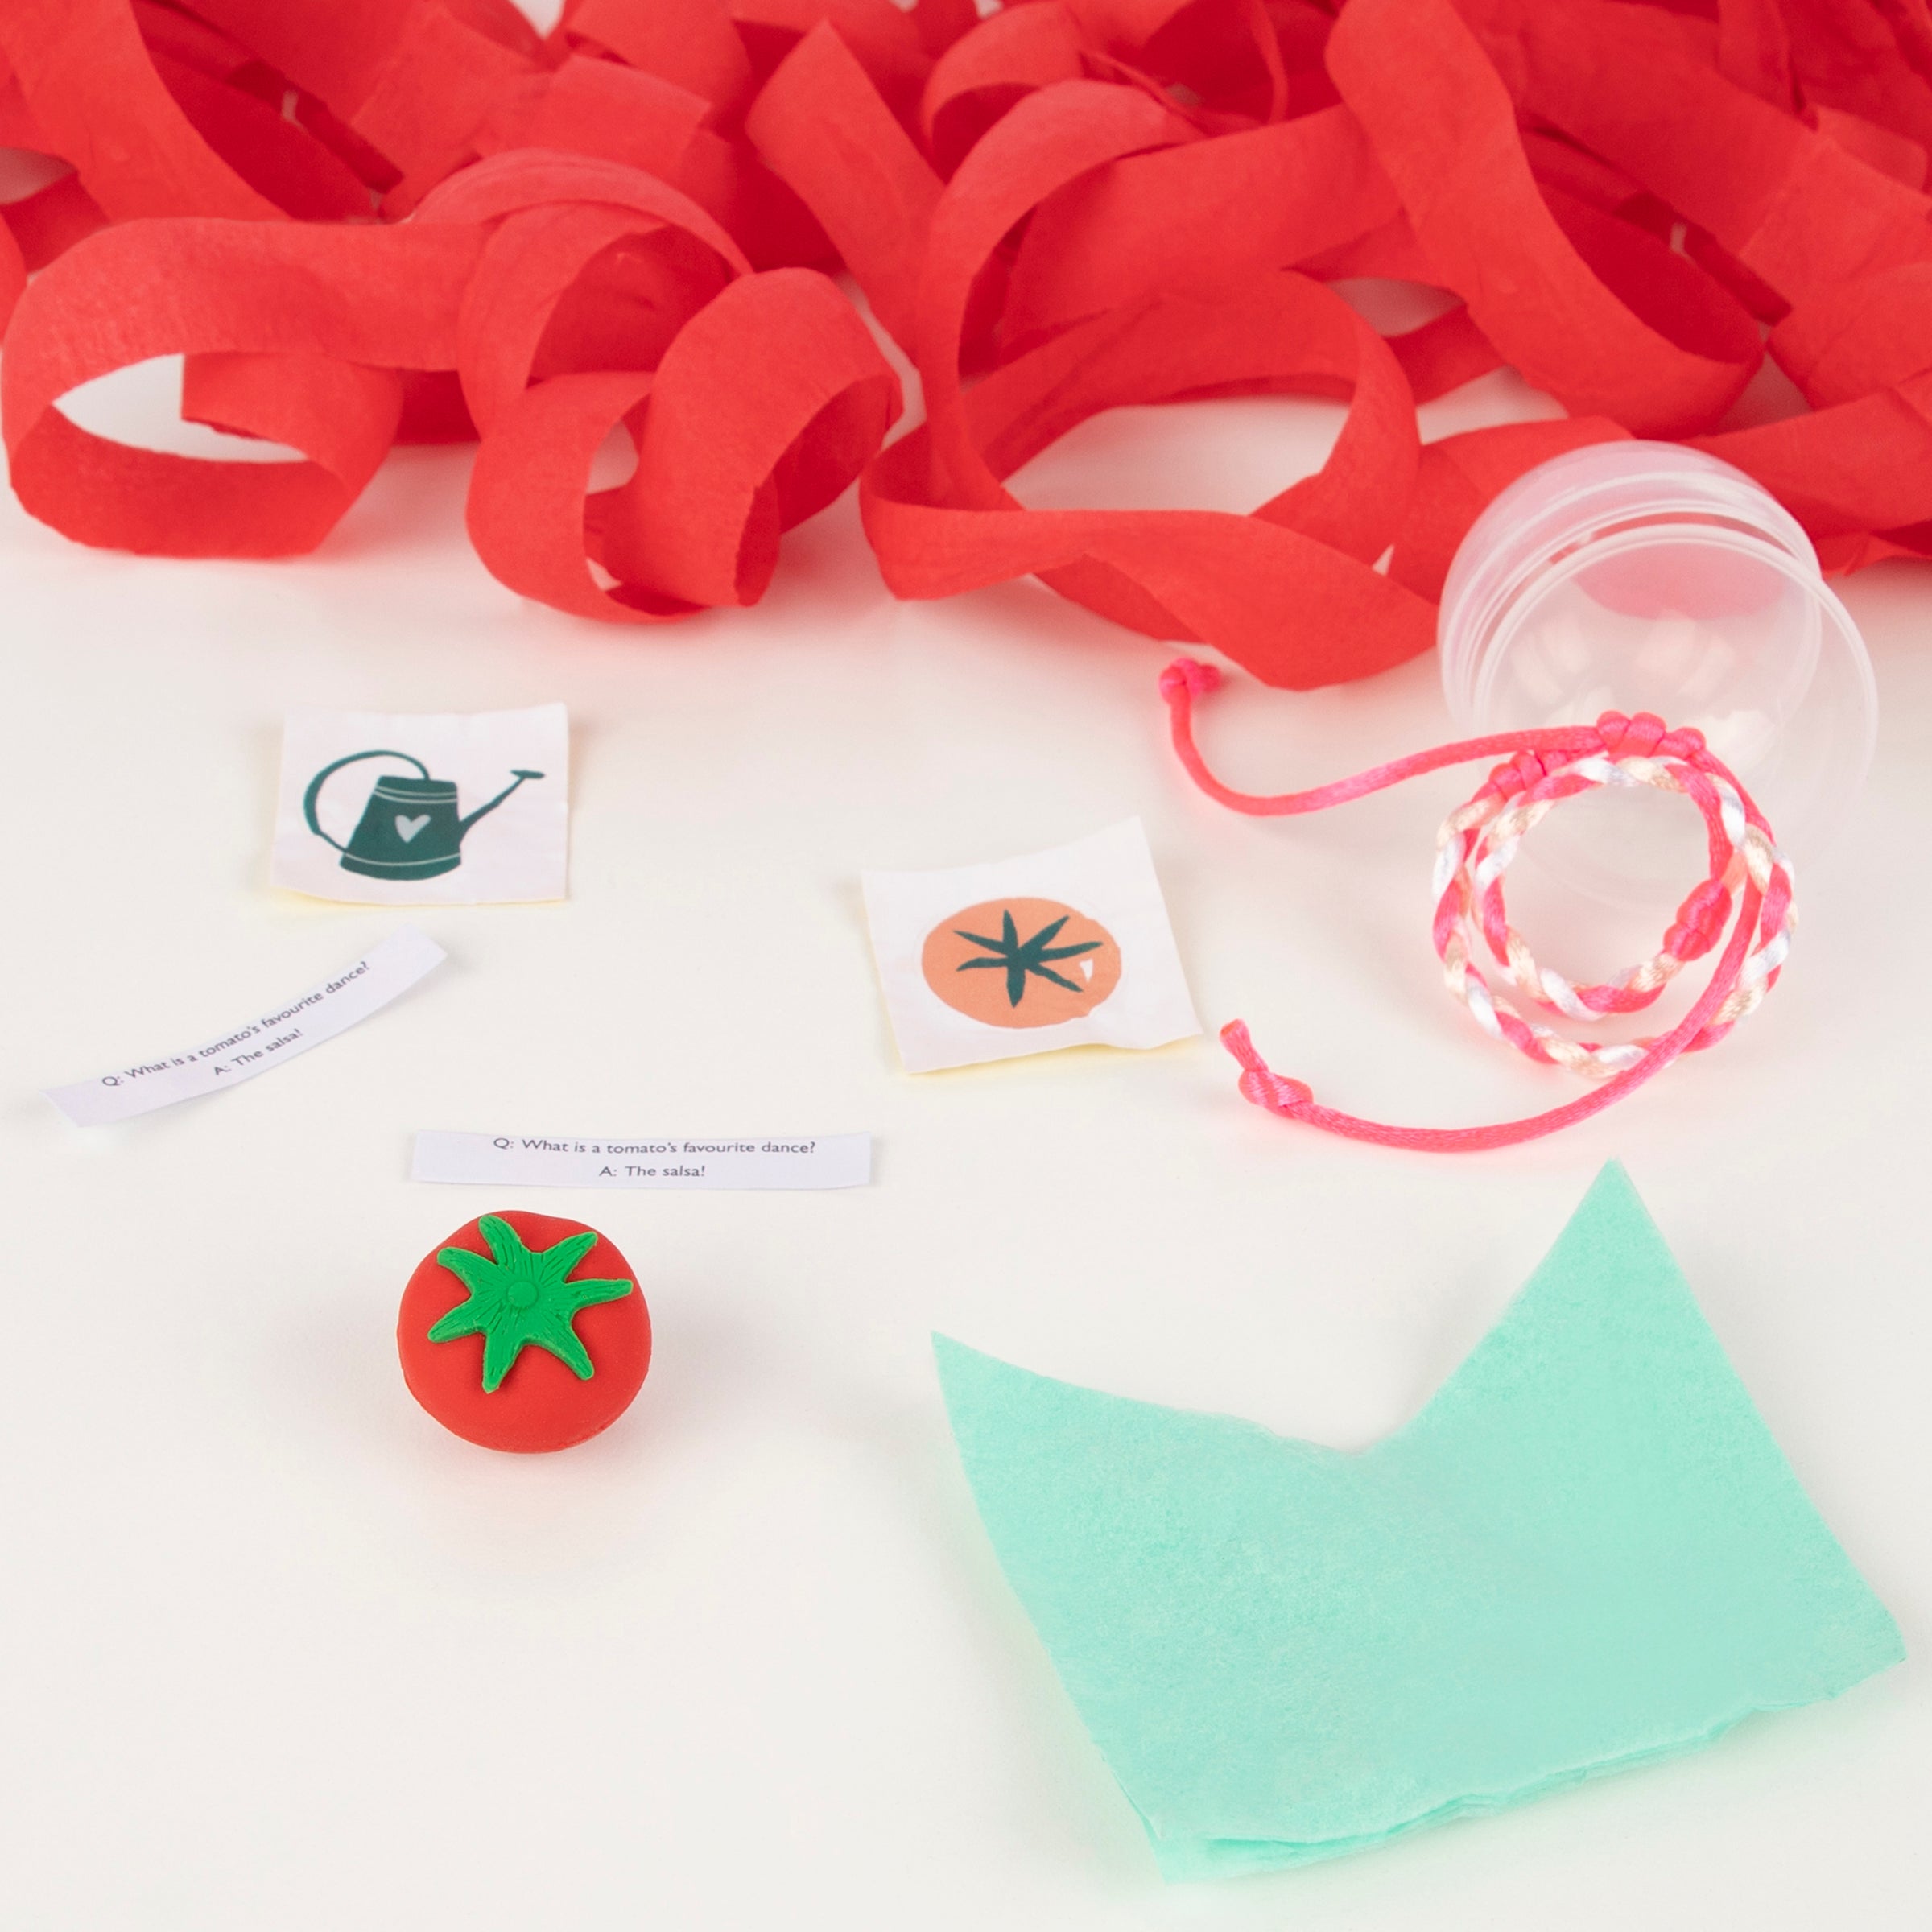 Give your party guests a surprise with our vegetable party favours filled with friendship bracelets, stickers, jokes and a party hat.